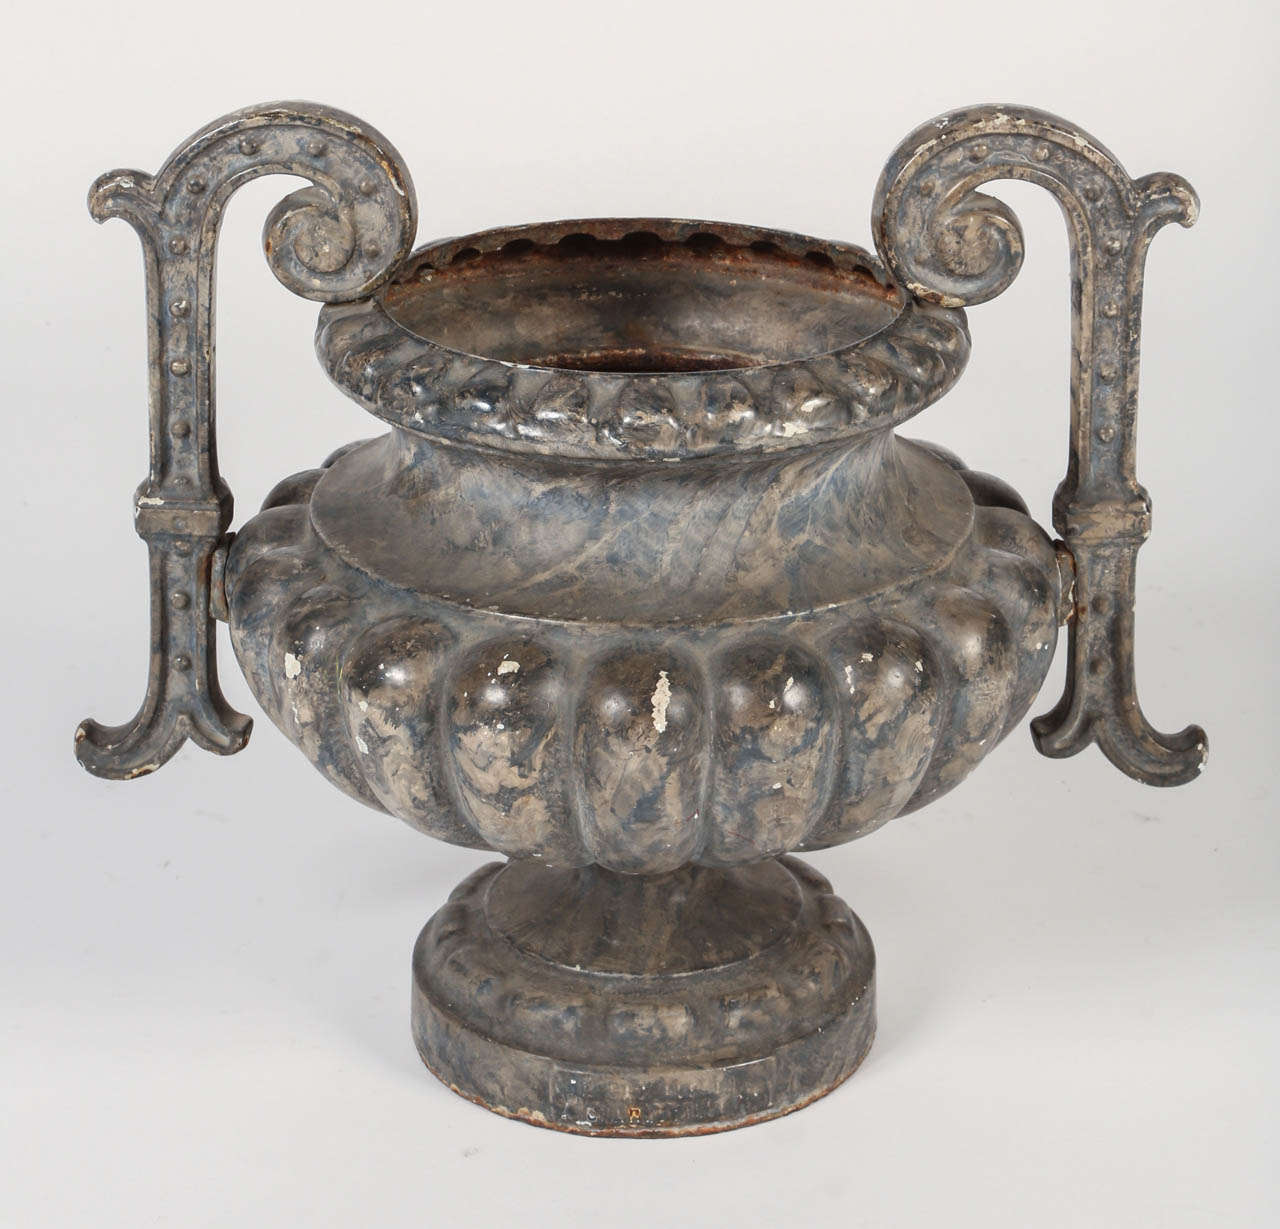 Gorgeous antique lobed and double handled French iron urn, circa 1880.
Stamped Alfred CORNEAU Foundry in Charleville.
This piece would be wonderful inside as a vase or placed outside to dress up a patio or balcony.